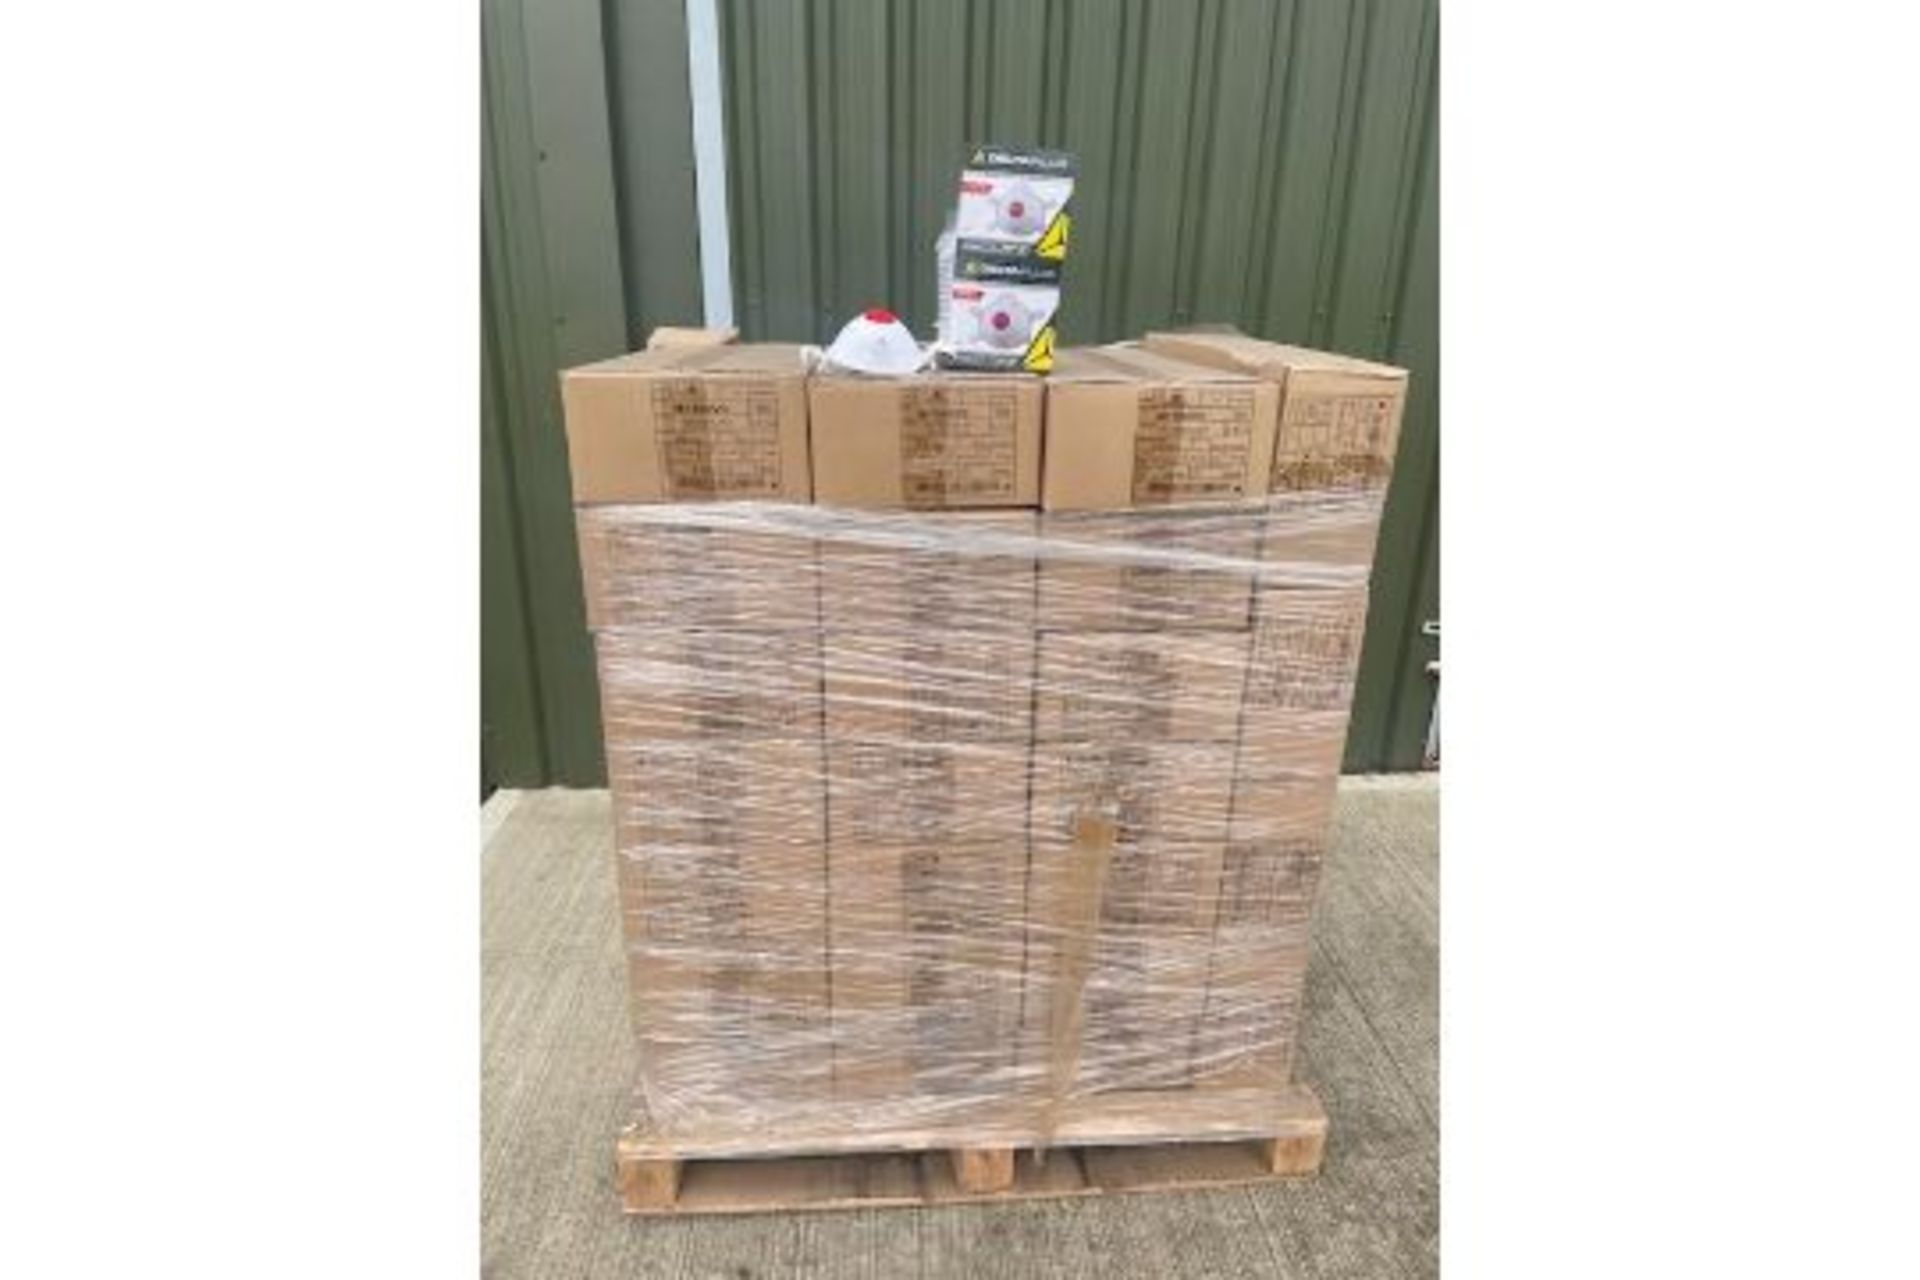 1 PALLET OF 1100 NEW UNUSED DELTA PLUS HIGH QUALITY DUST RESPIRATOR MASKS CE MARKED WITH VALVE - Image 2 of 6